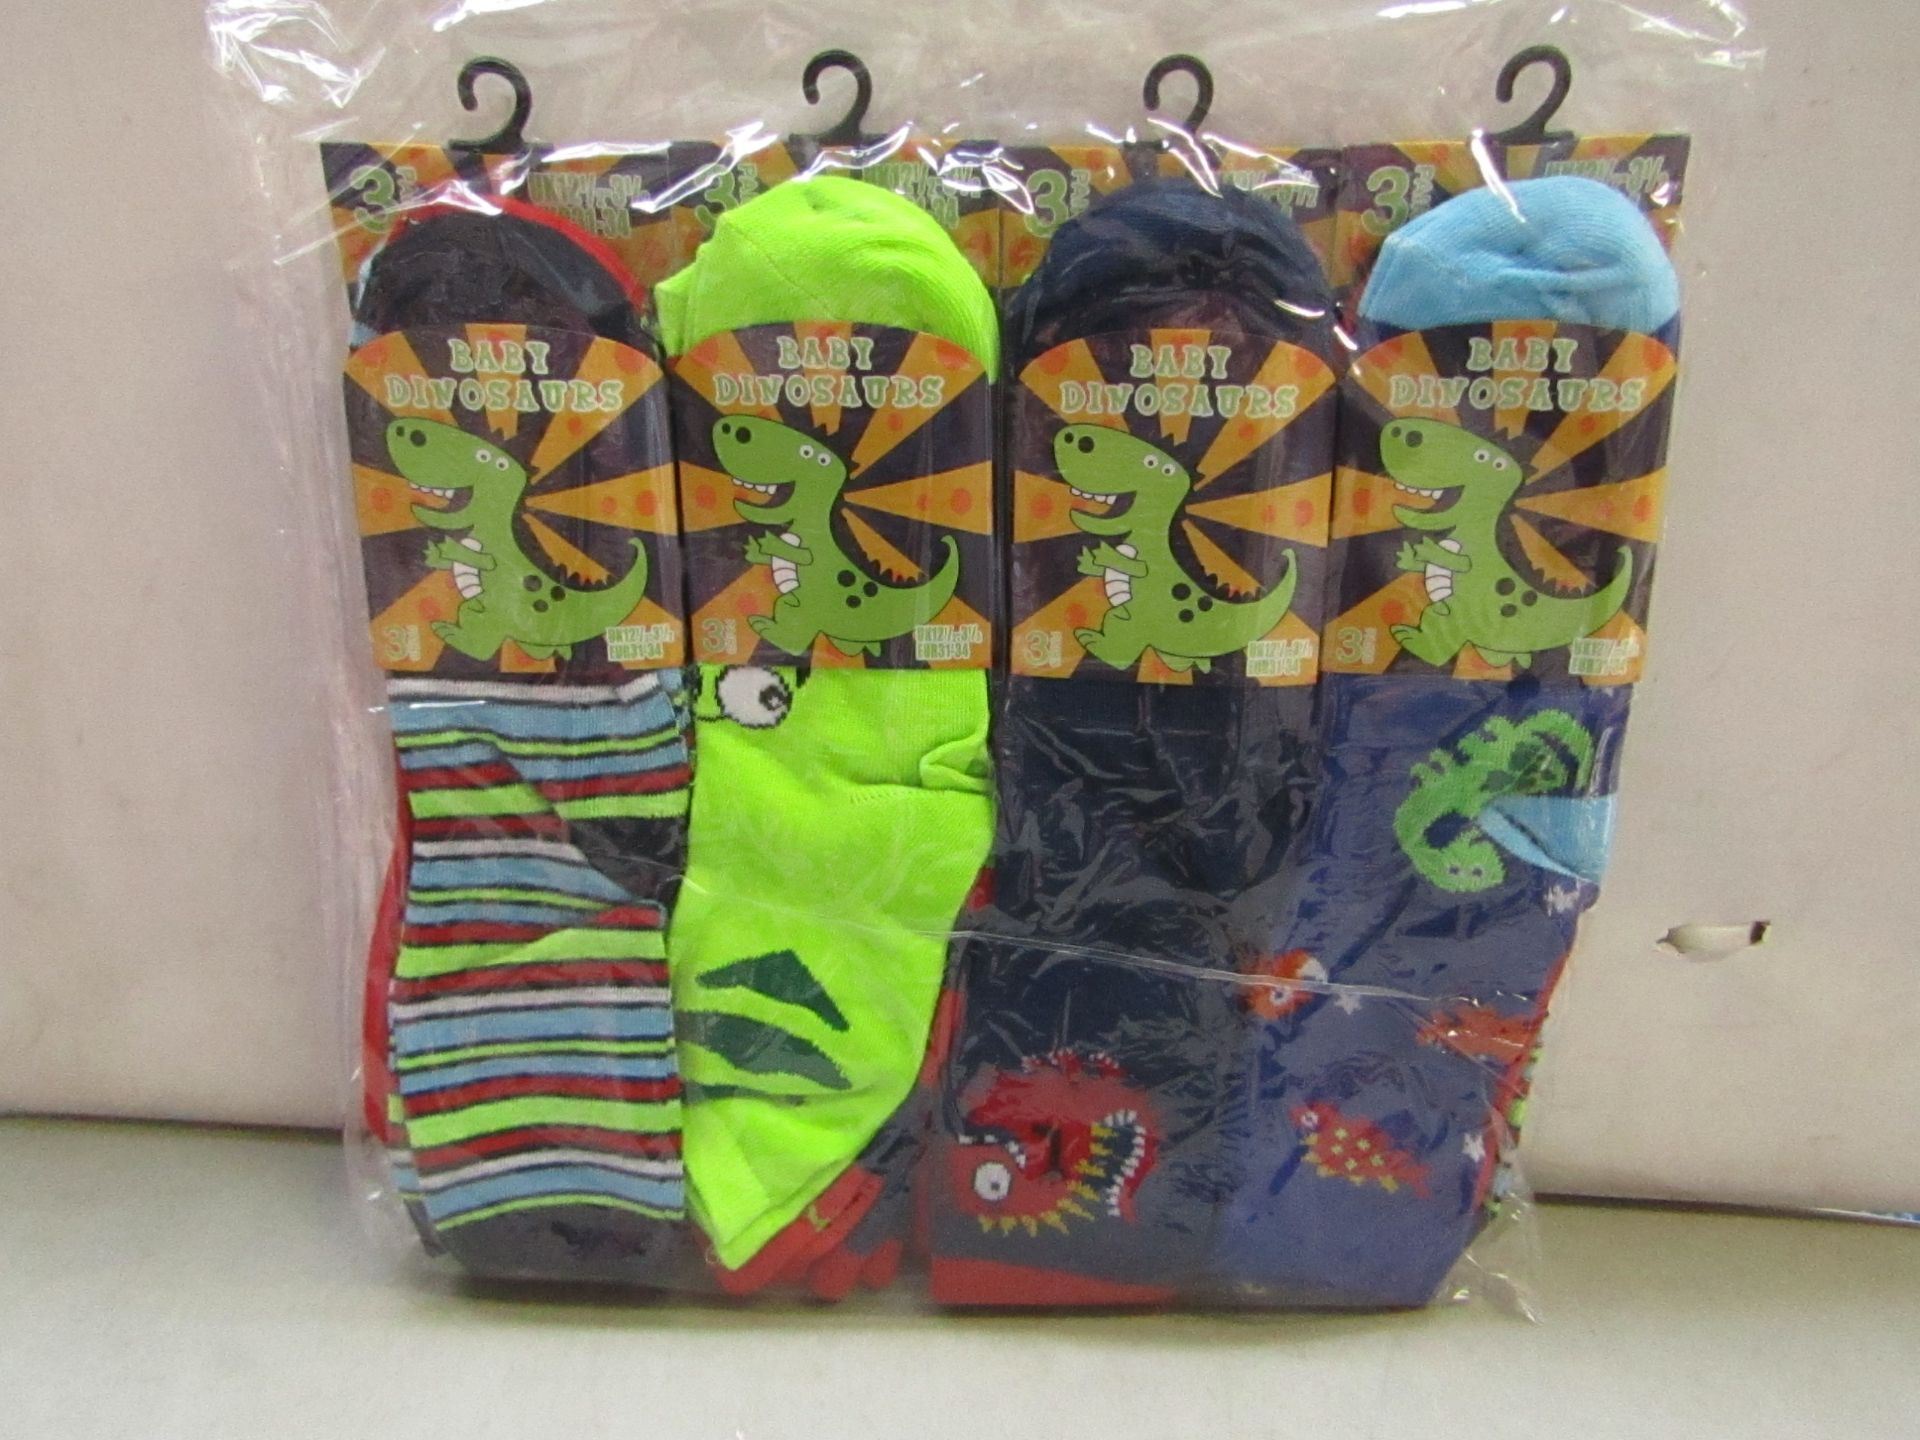 Pack of 12 Childrens Baby Dinosaur Themed socks size 12 1/2 to 3 1/2 all new in packaging